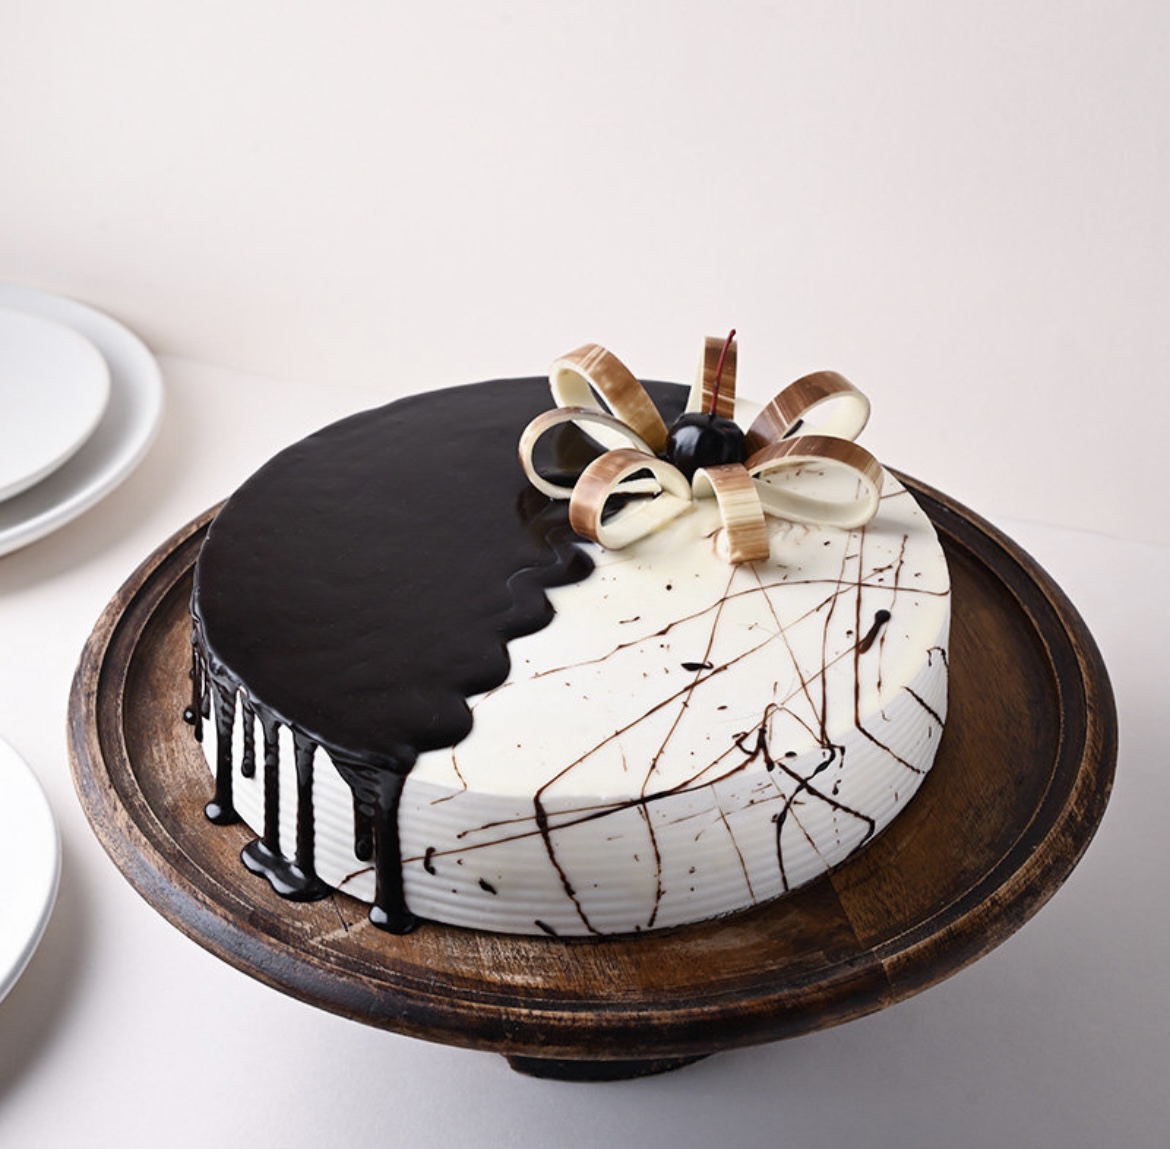 How to Make Chocolate Vanilla Cake: 9 Steps (with Pictures)